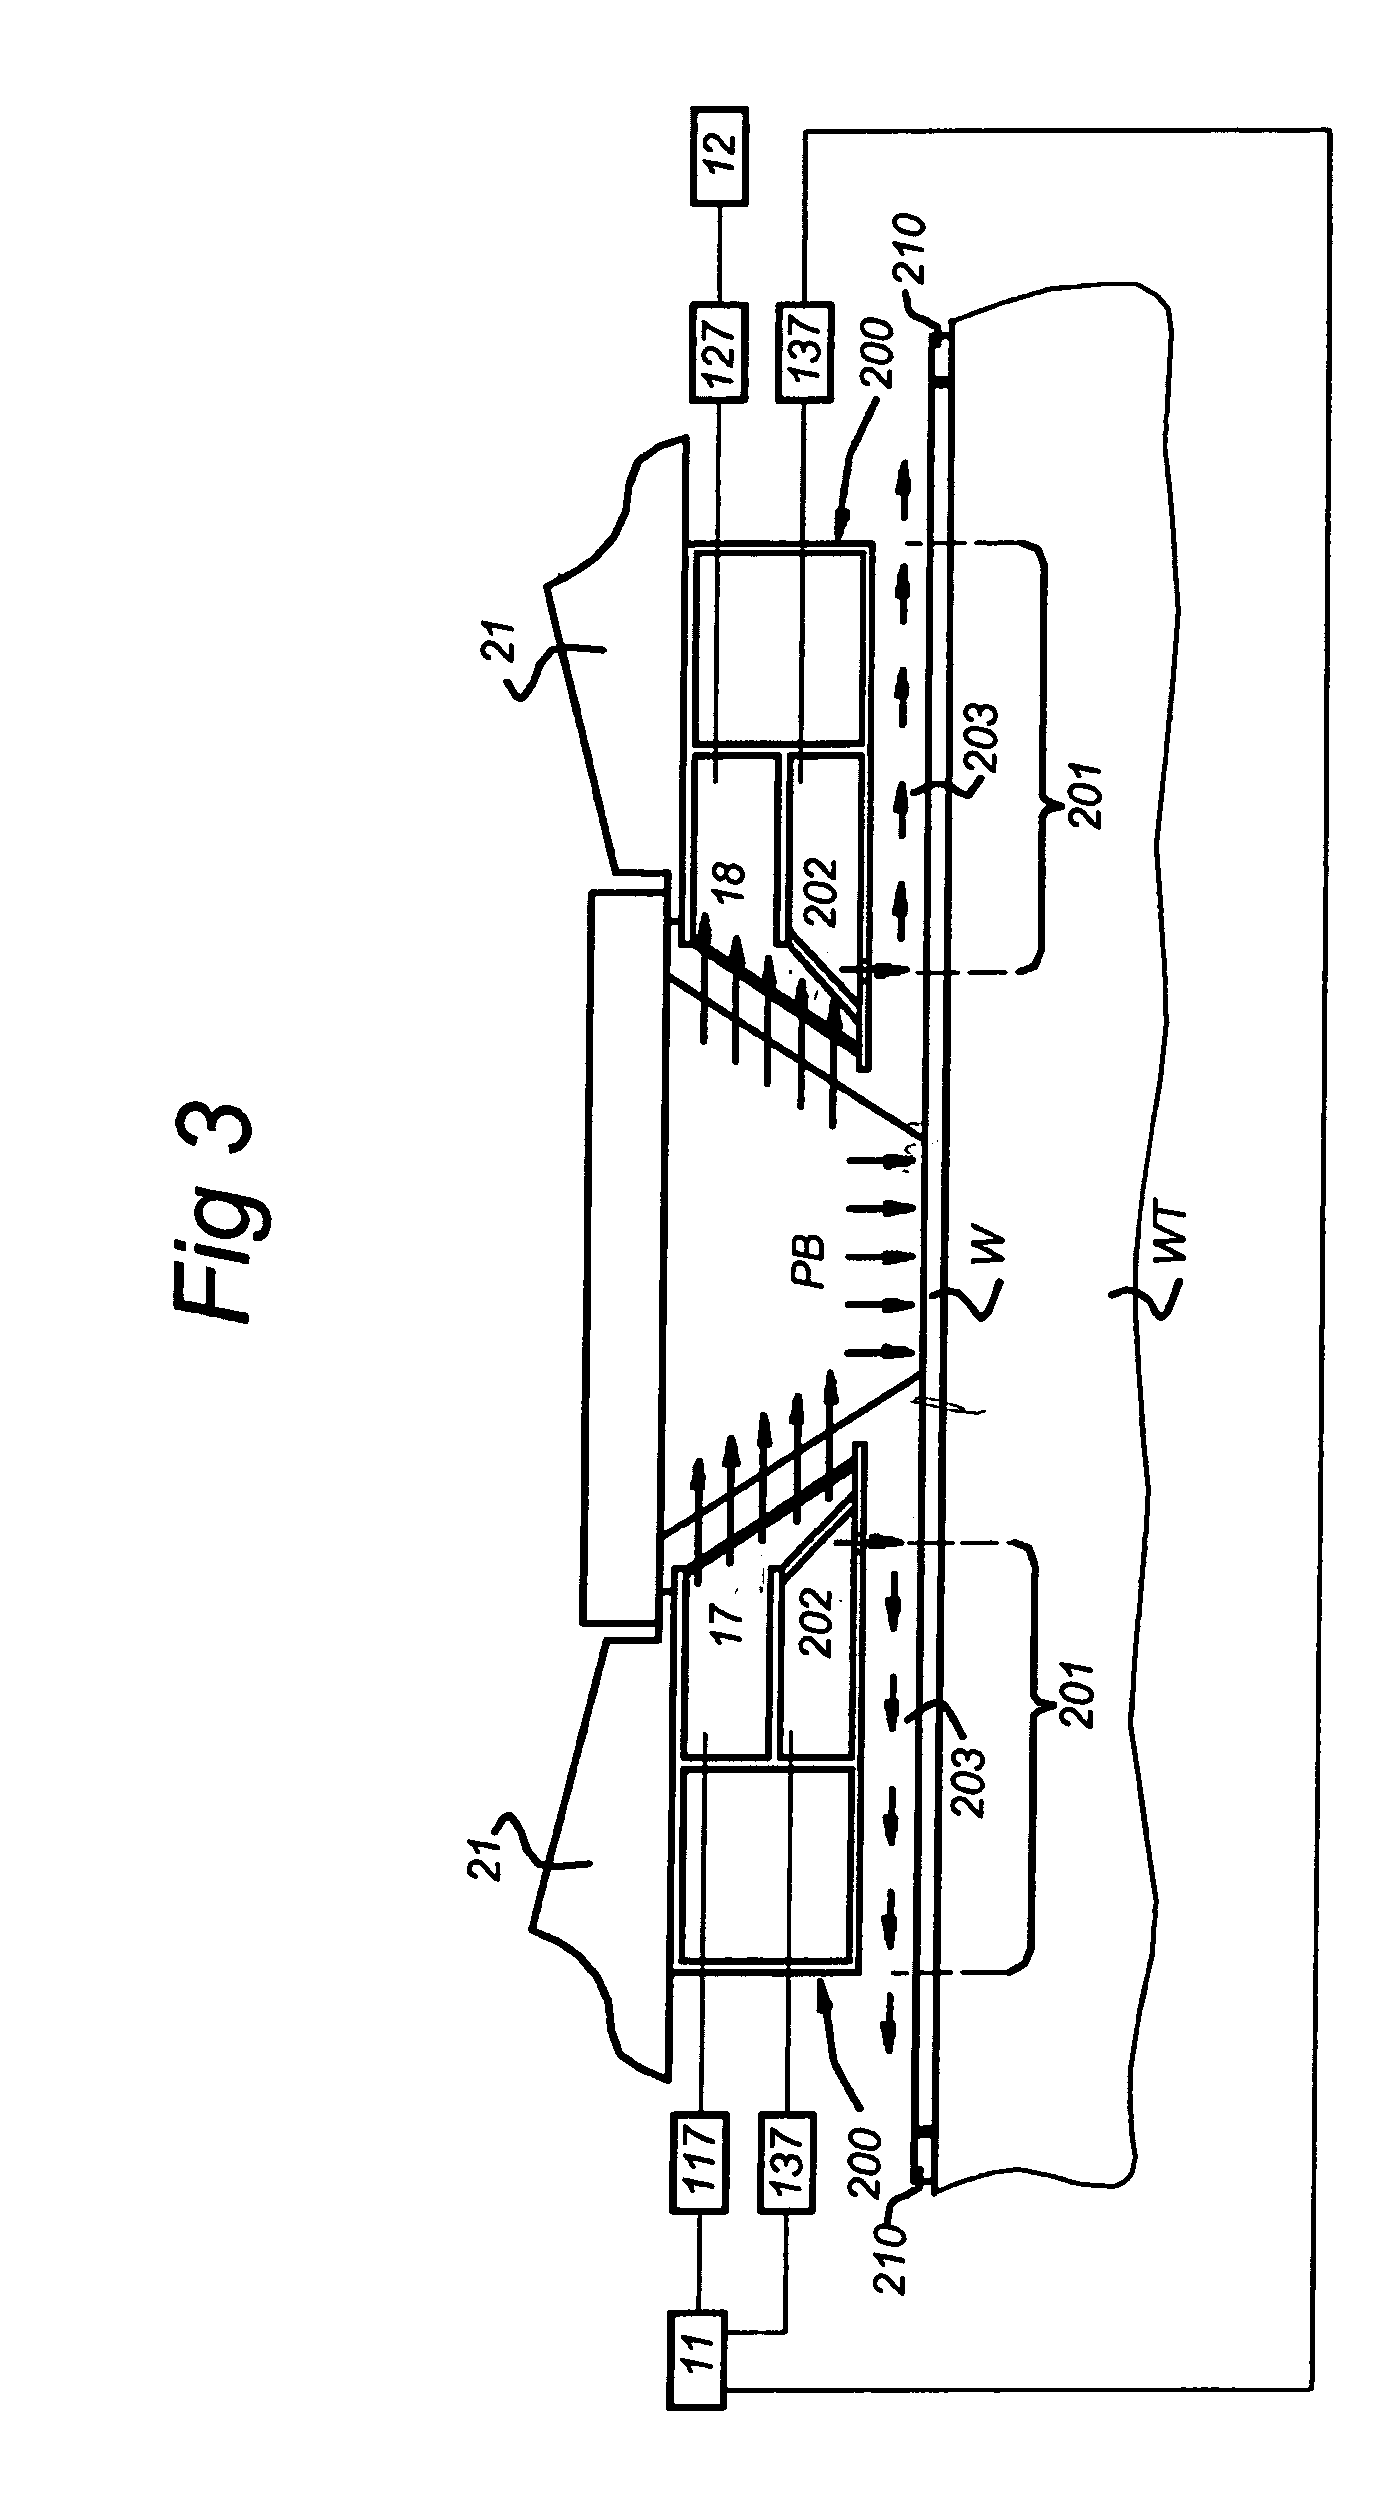 Lithographic apparatus comprising a gas flushing system